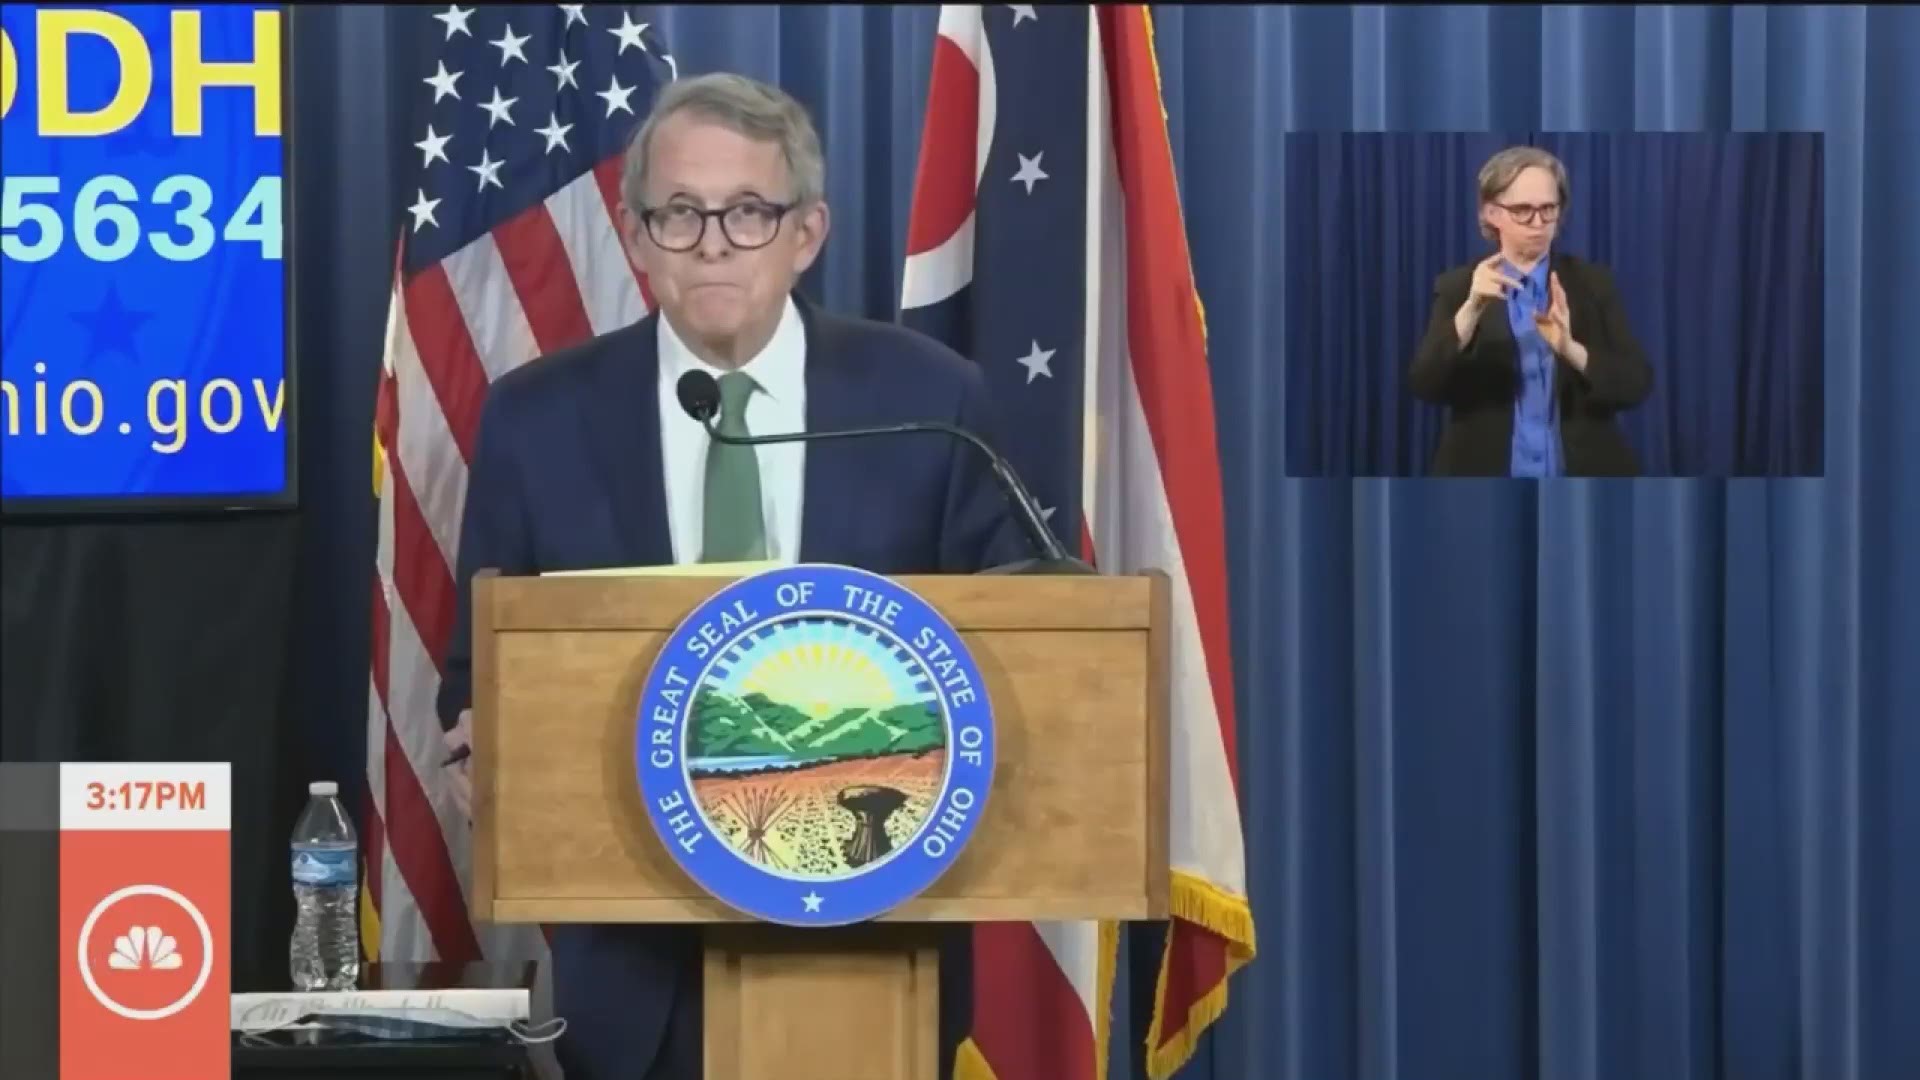 Your 'wine with DeWine' will have to wait until Thursday, May 7. Ohio Gov. Mike DeWine will not be holding his daily coronavirus update today (May 6).